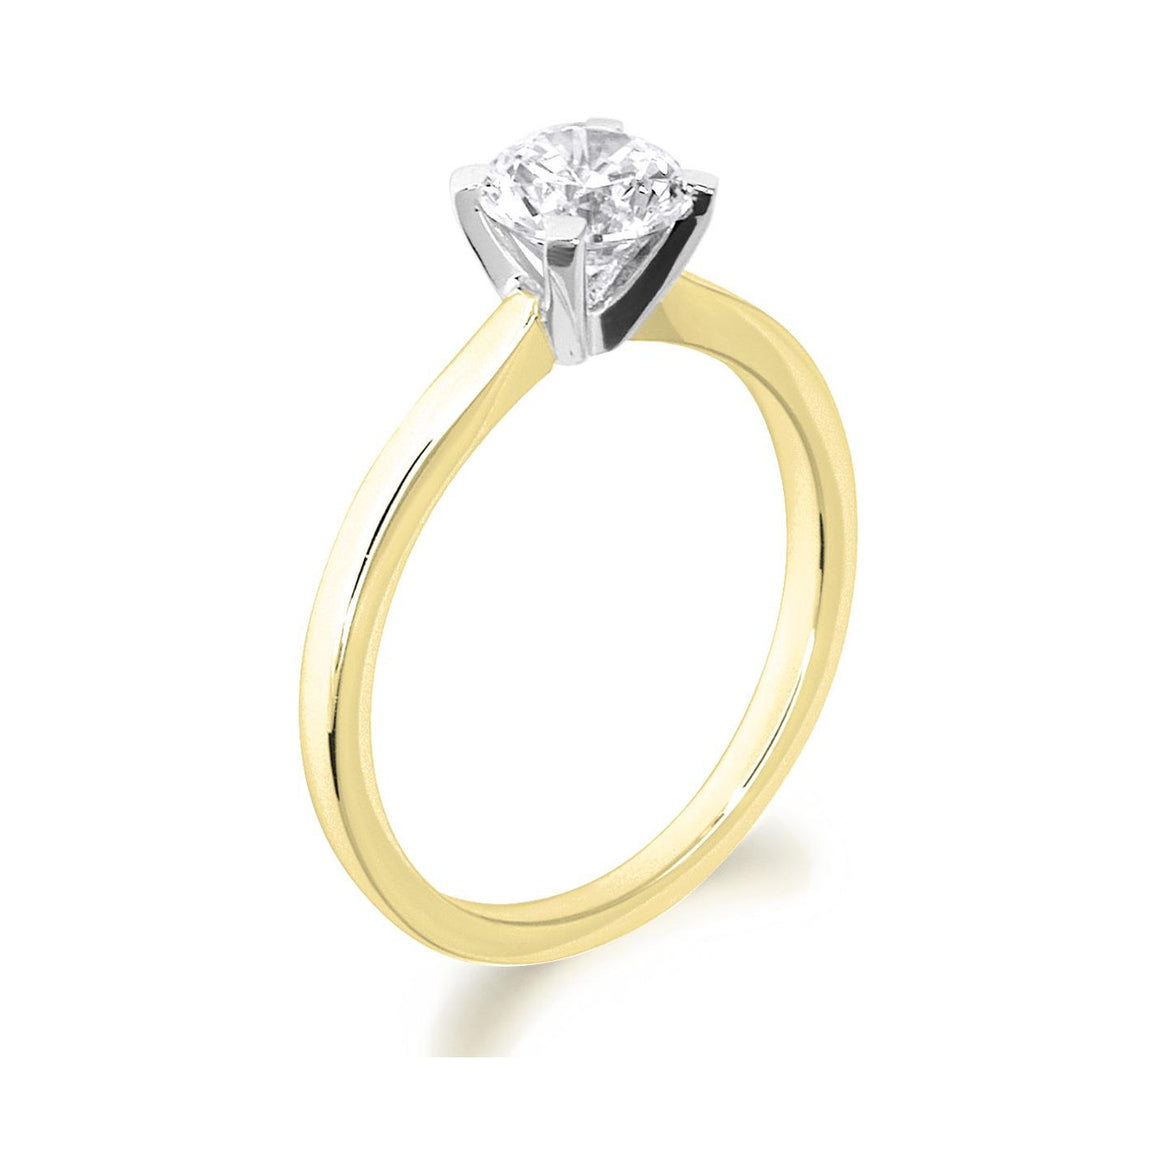 4 Claw Square Claws Brilliant Cut 18ct Yellow Gold Solitaire